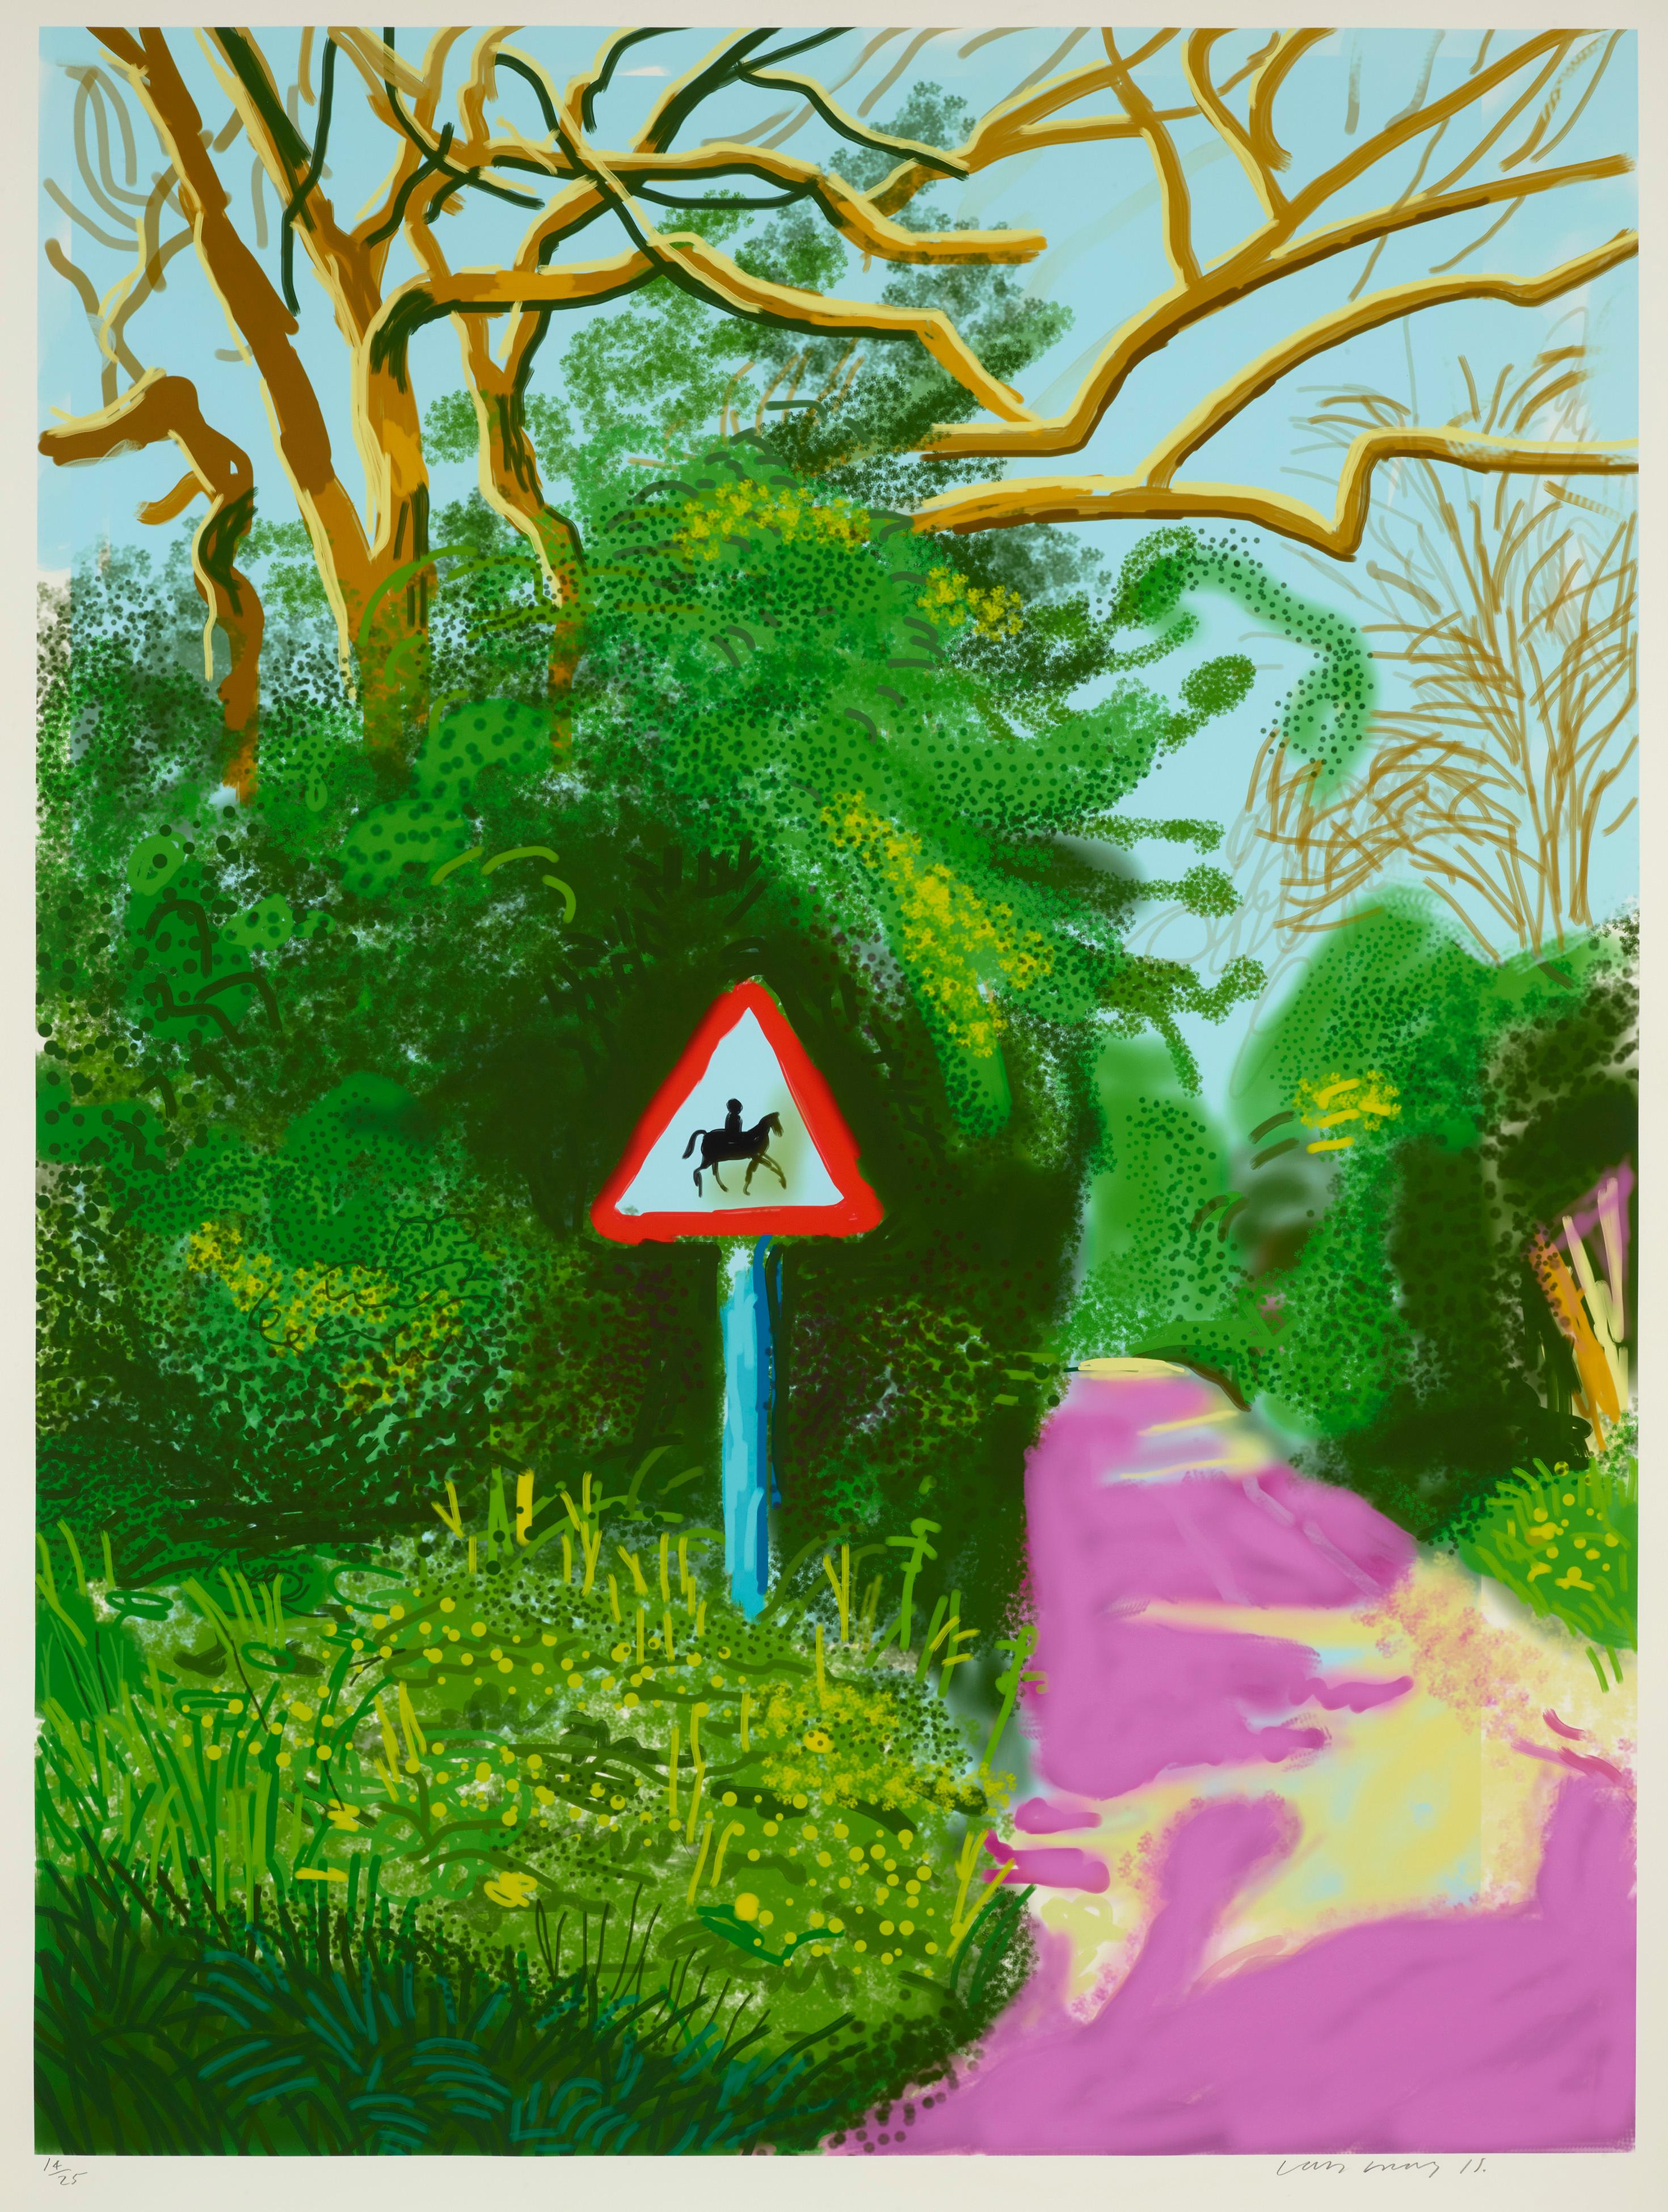 The Arrival of Spring in Woldgate, East Yorkshire in 2011 – 5 May 2011 - Print by David Hockney